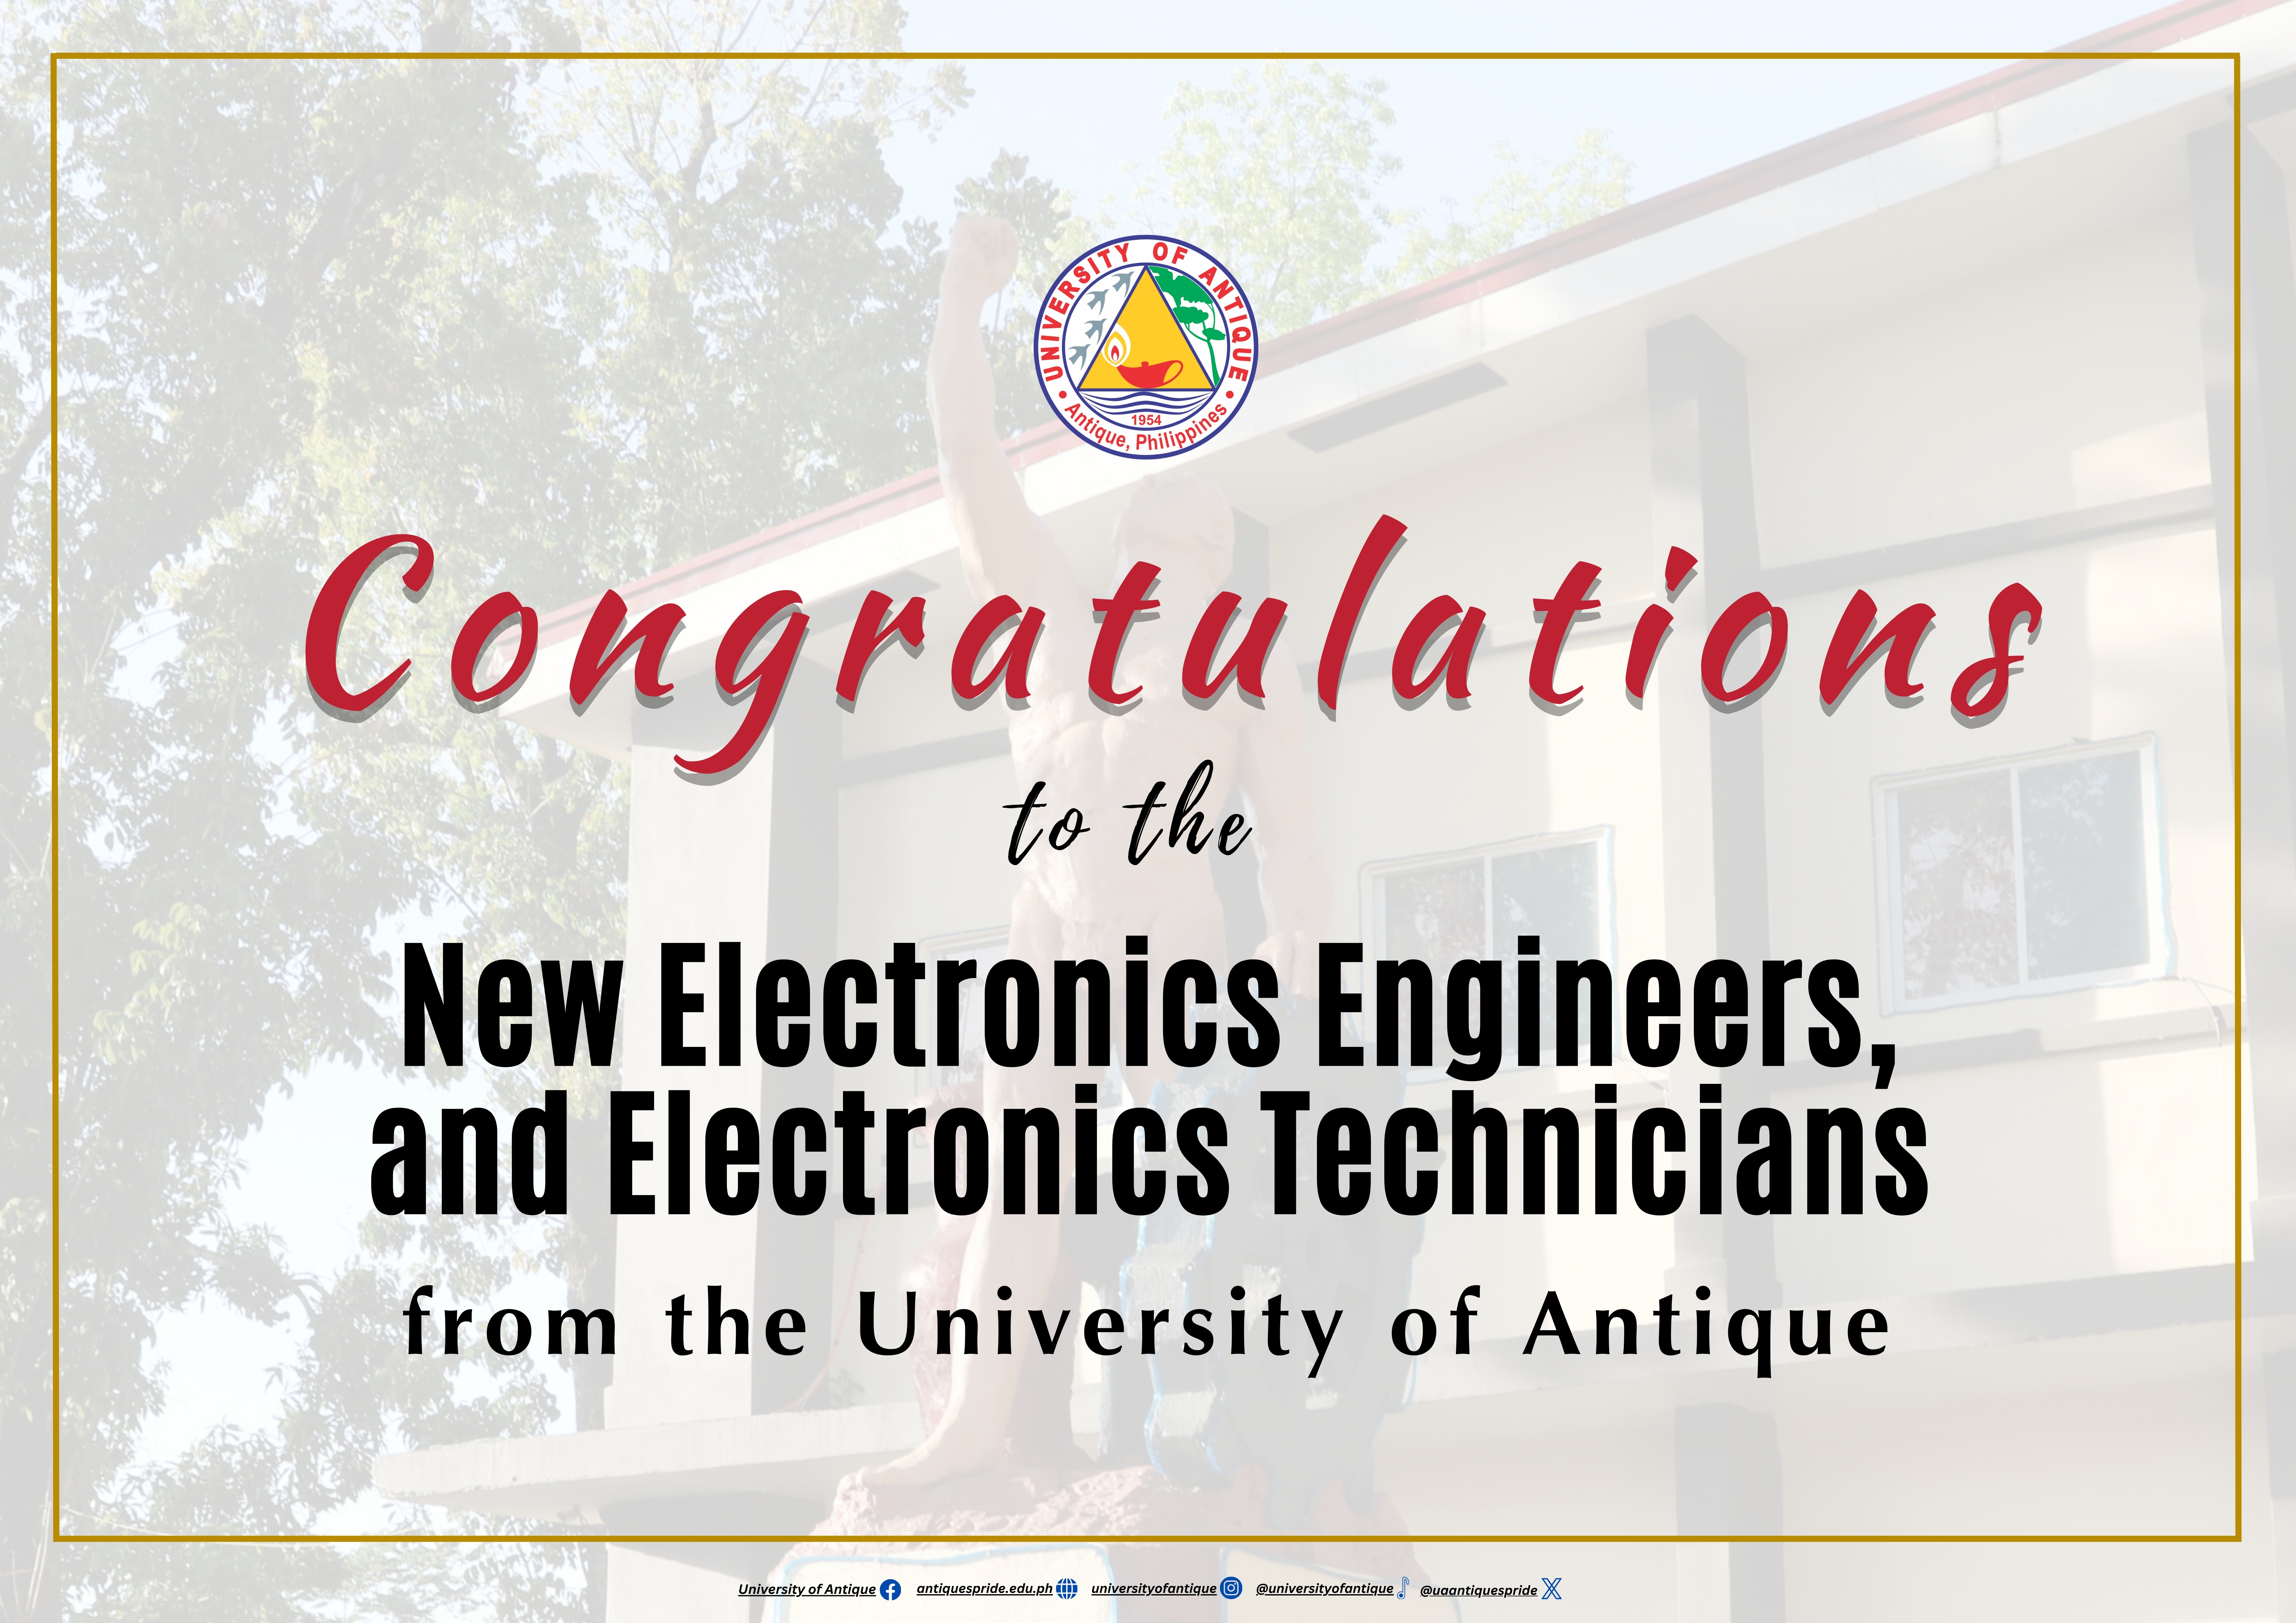 UA produces New Electronics Engineers and Technicians